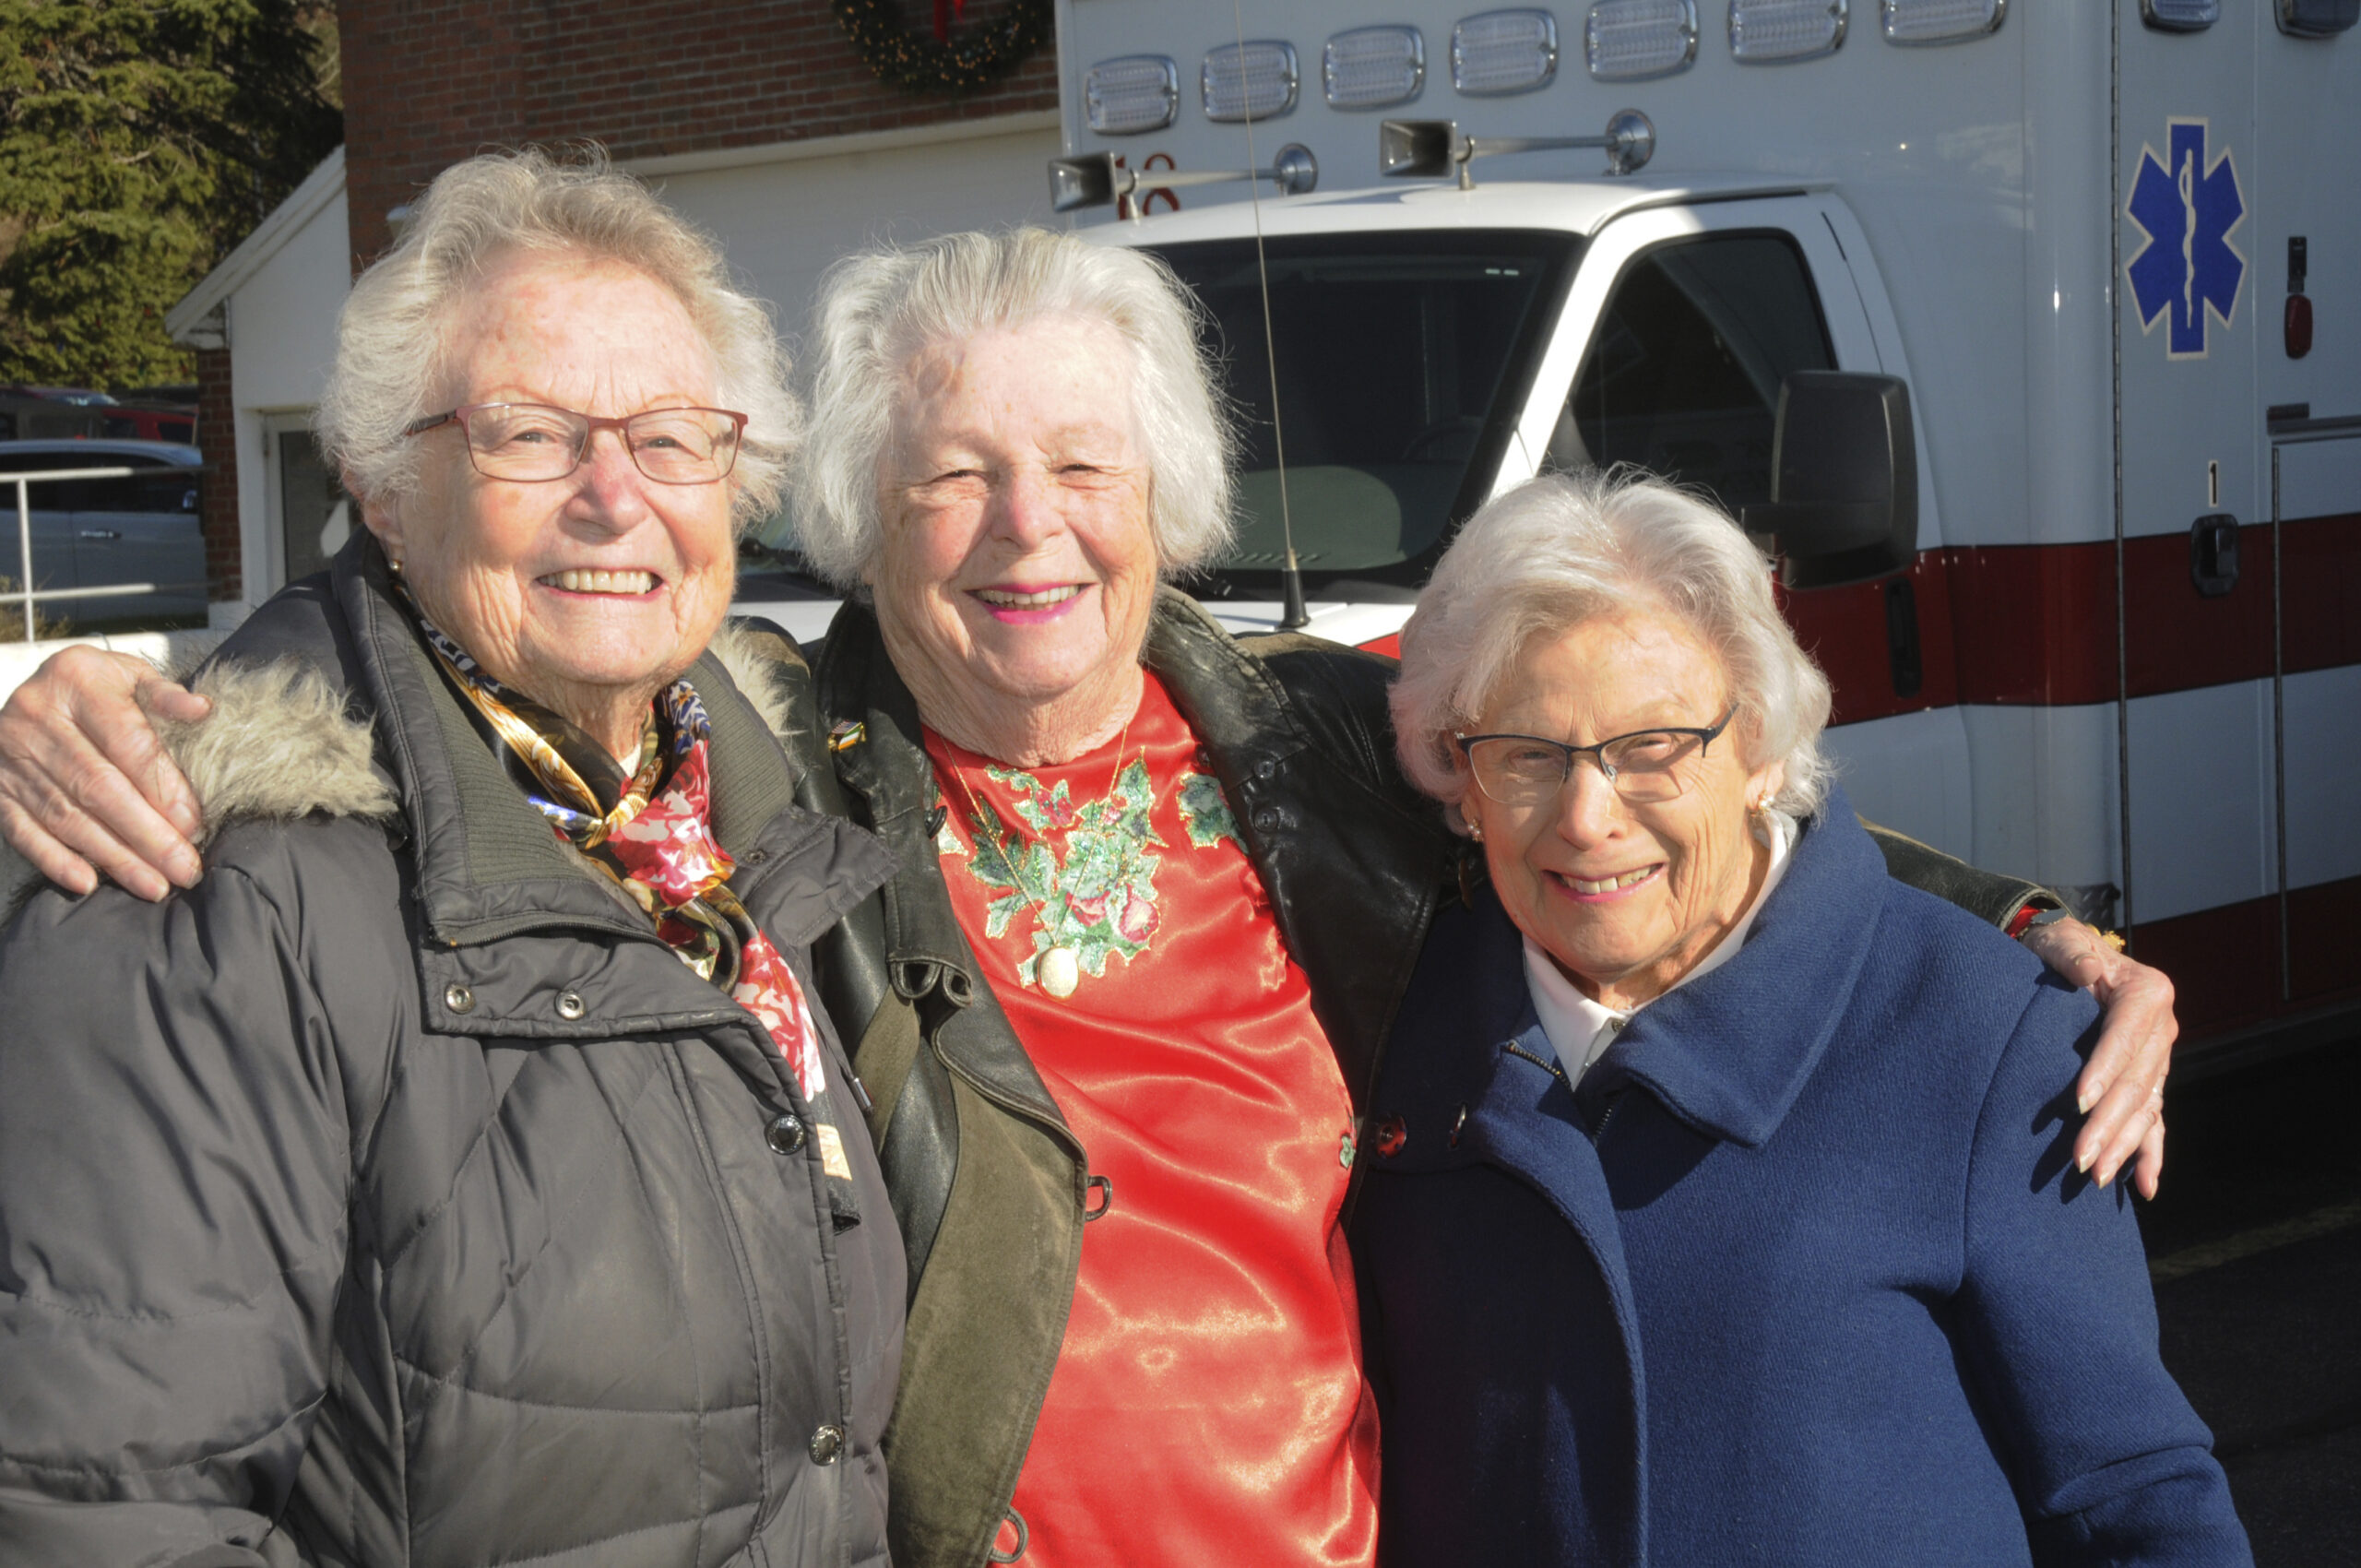 Ann Peterson, June Herlihy and Edna Steck at the Montauk Fire Department's annual dinner for Seniors on Sunday. Equipment bays were cleared out to make room for festive dinner tables. MFD volunteers handed out 